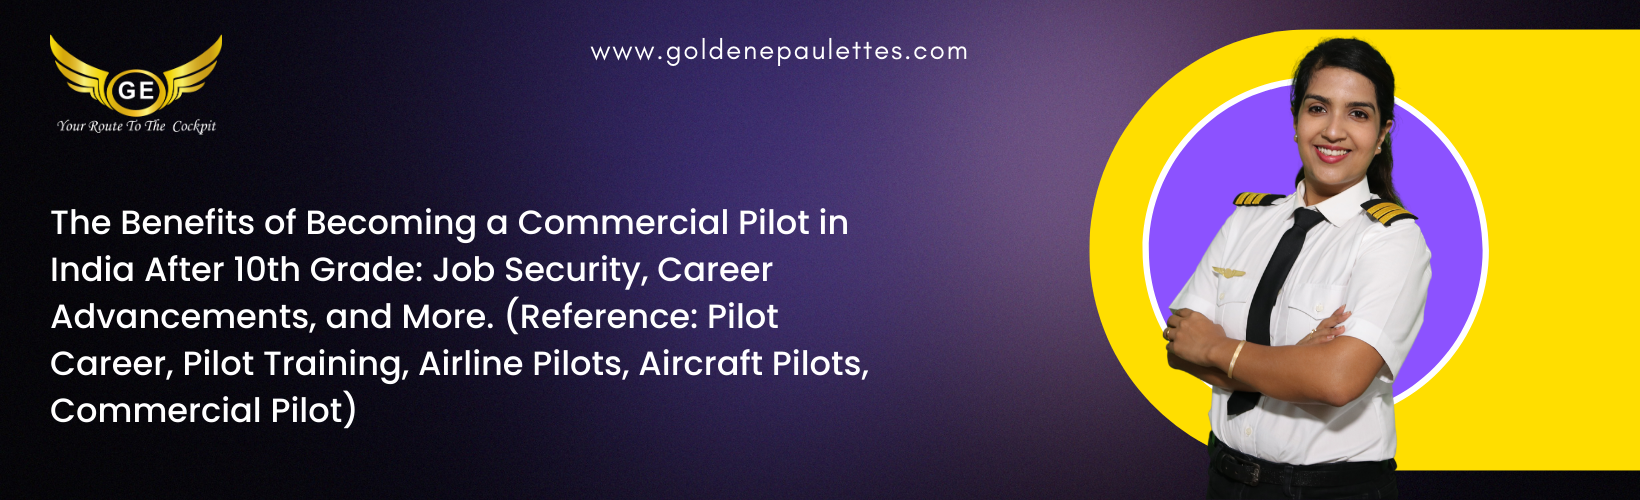 What Are the Benefits of Becoming a Commercial Pilot in India After 10th Grade